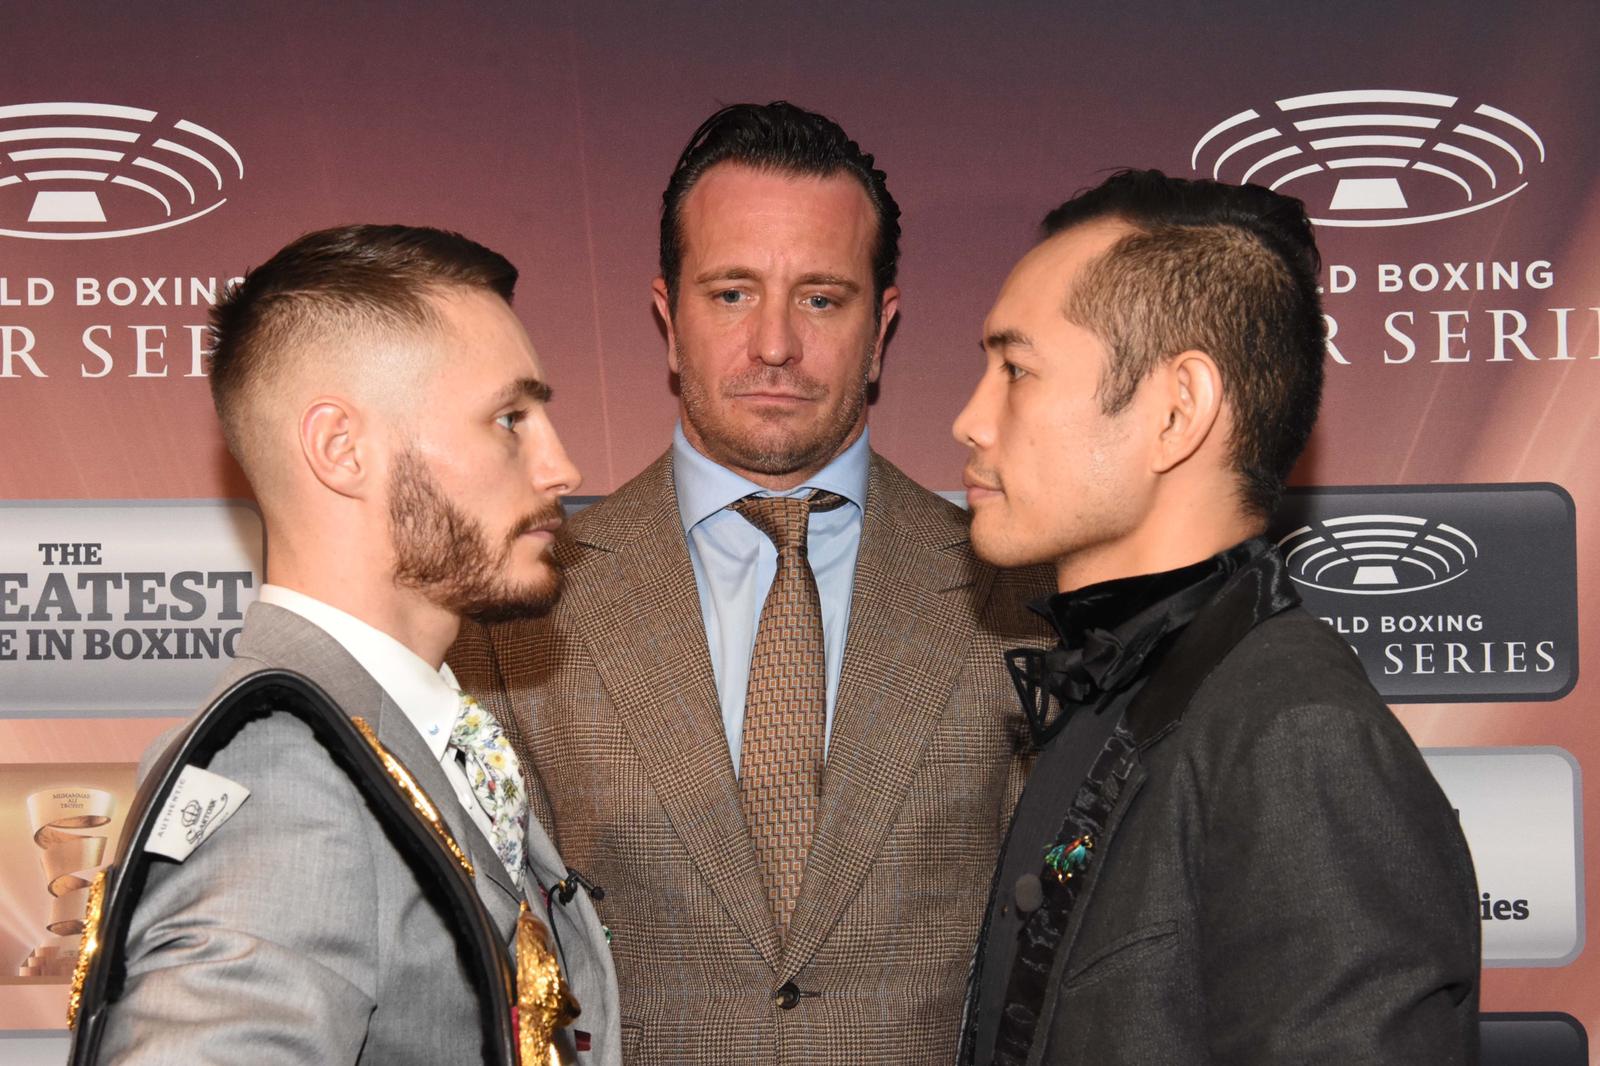 Burnett and Donaire ready to battle in Scotland